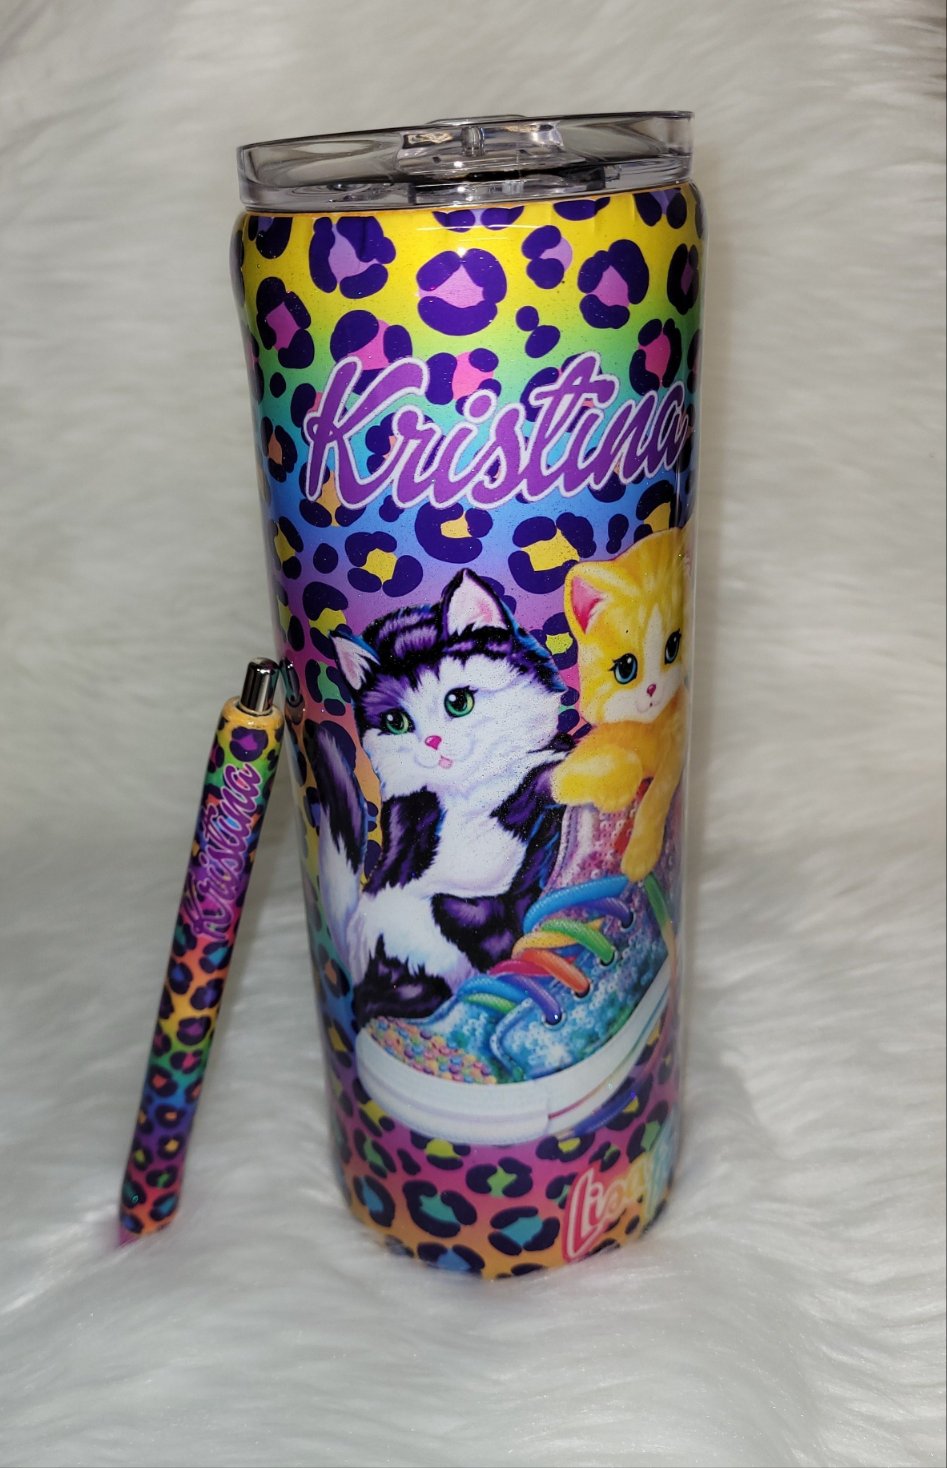 80's style neon cup with kittens and a matching pen